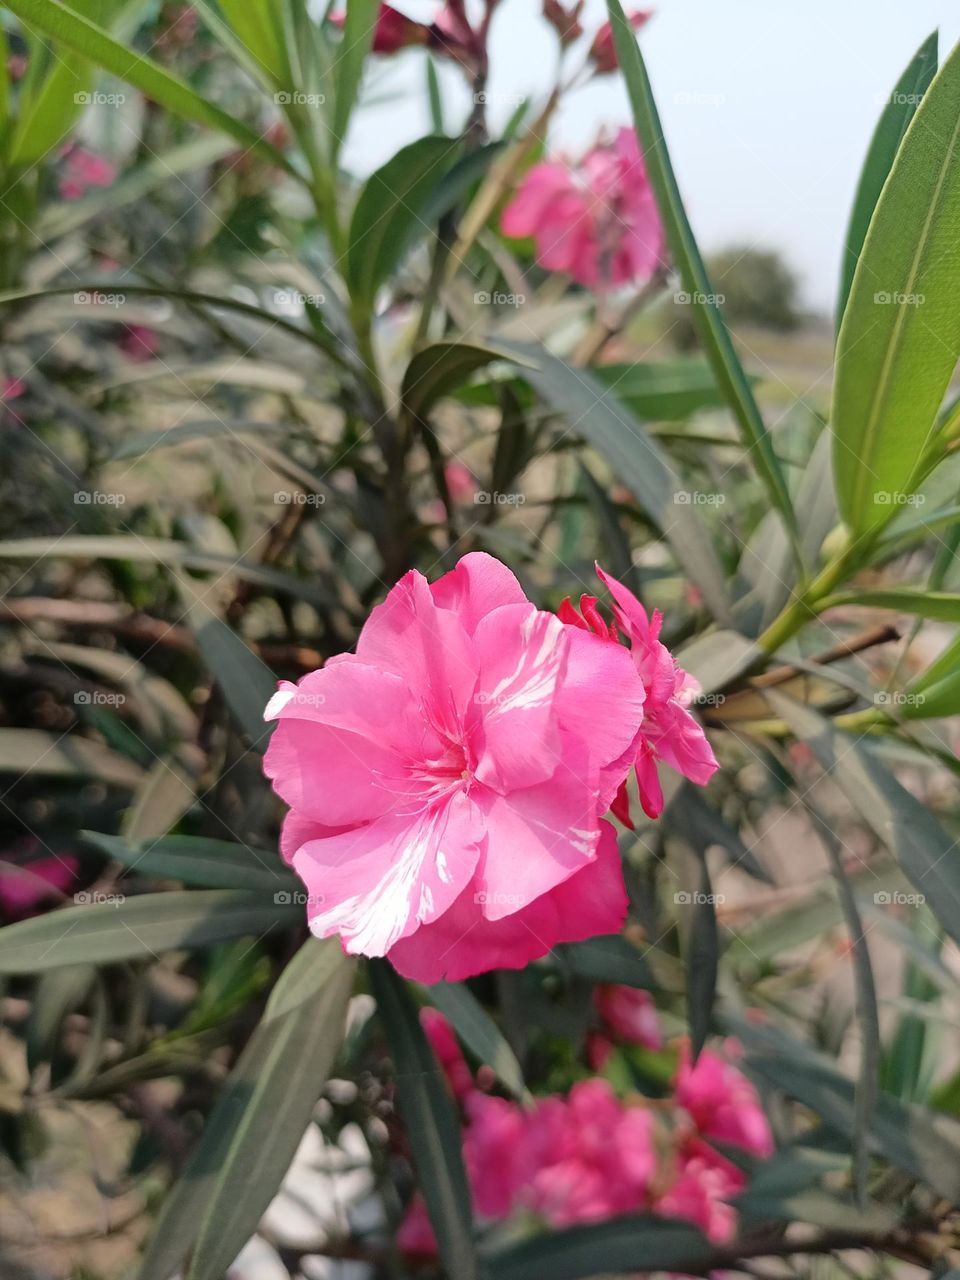 Nerium or Kaner Plant Also known as Oleander or Rosebay, this is a tall shrub-like plant that has flowers in shades of white, yellow, orange and red. These plants grow to the height of 12-15 feet and look good in pots and planters.